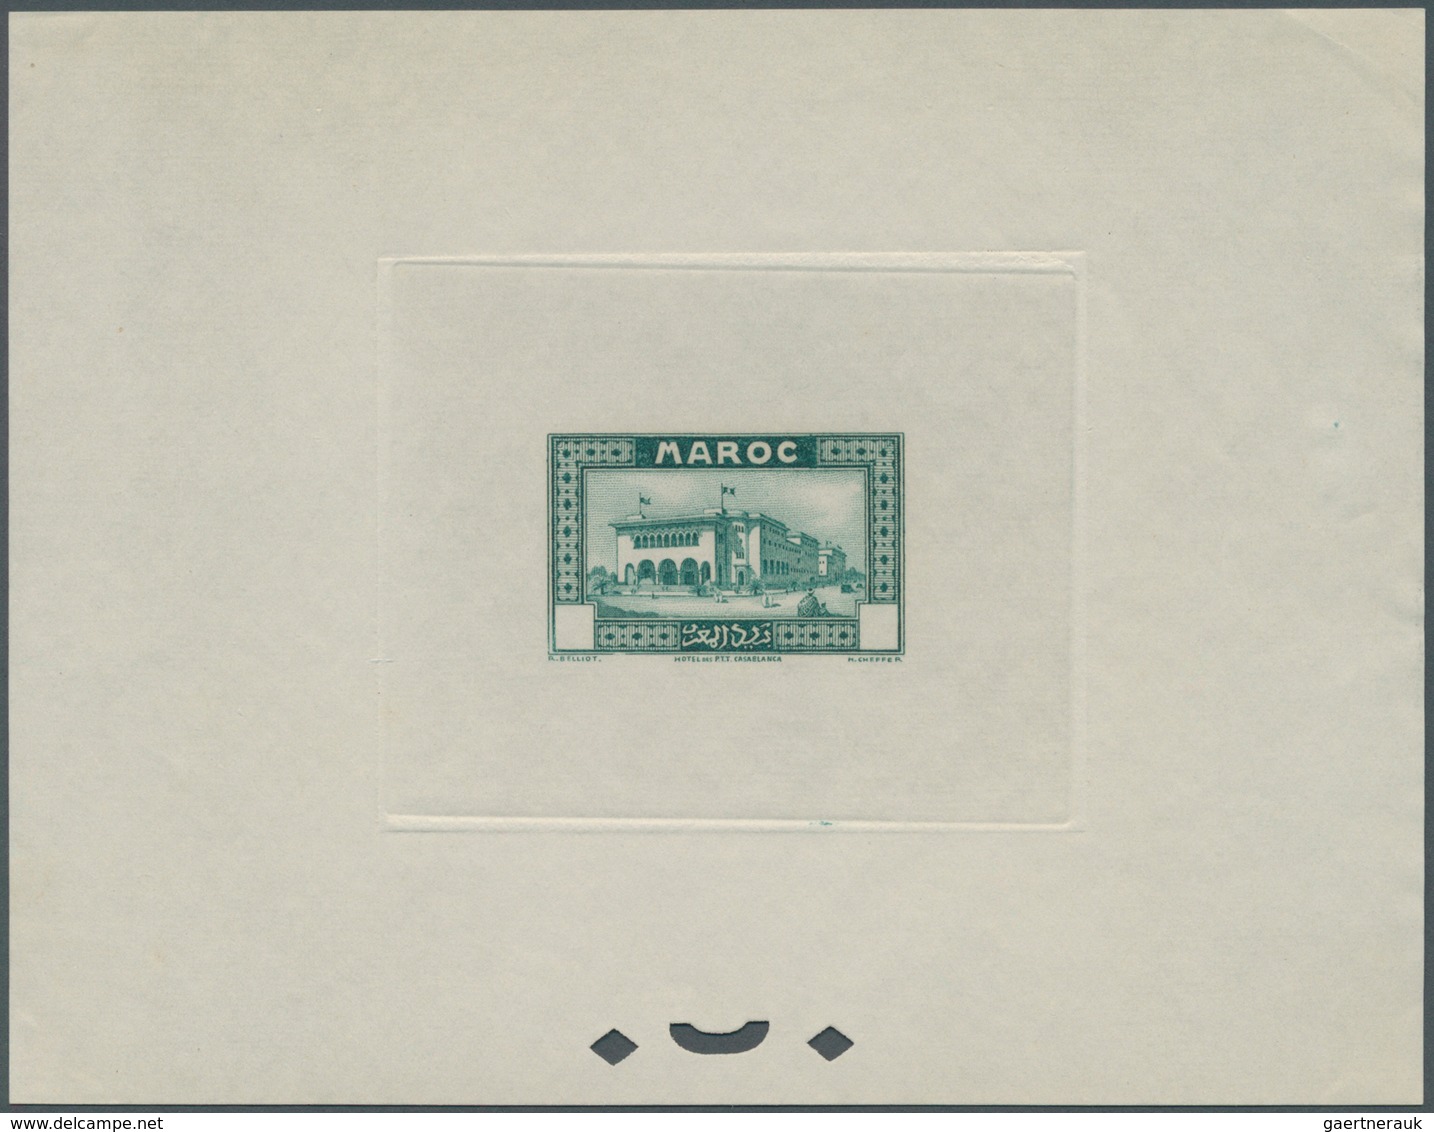 Marokko: 1933, Definitives "Views of Morocco", 1c. to 20fr., complete set of 24 values, epreuve with